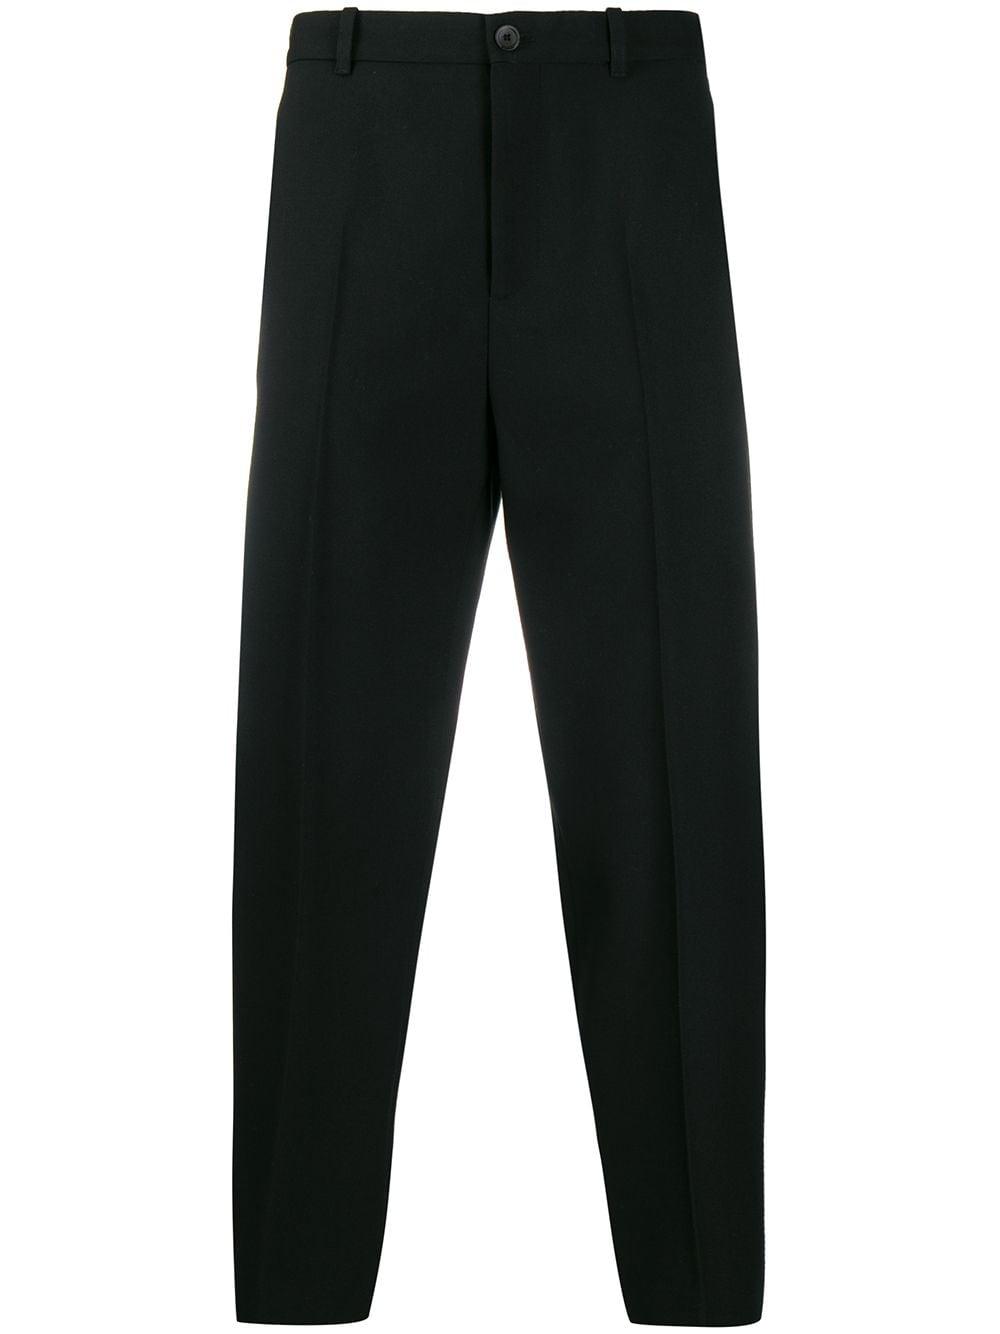 Balenciaga Wool Cropped Tailored Trousers in Black for Men - Lyst